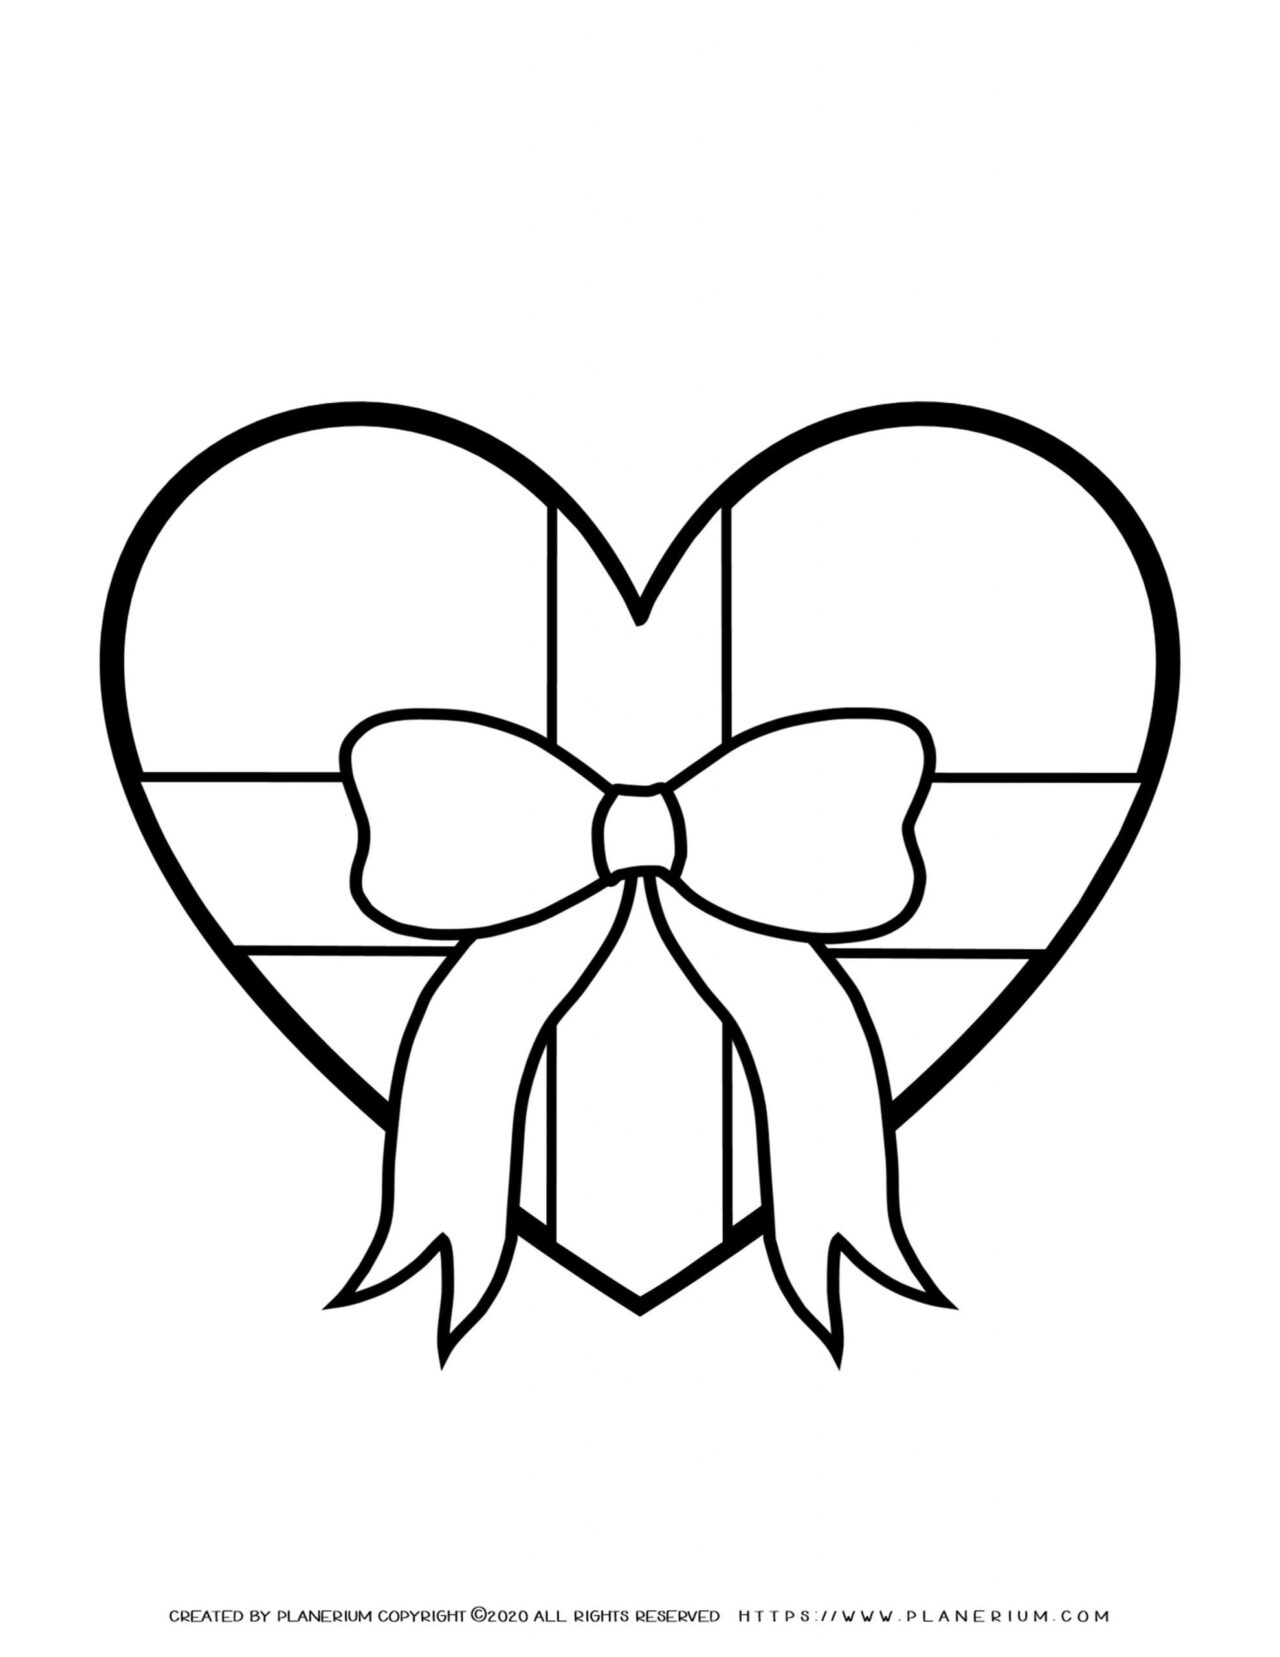 Mother's Day Coloring Page - Heart Present